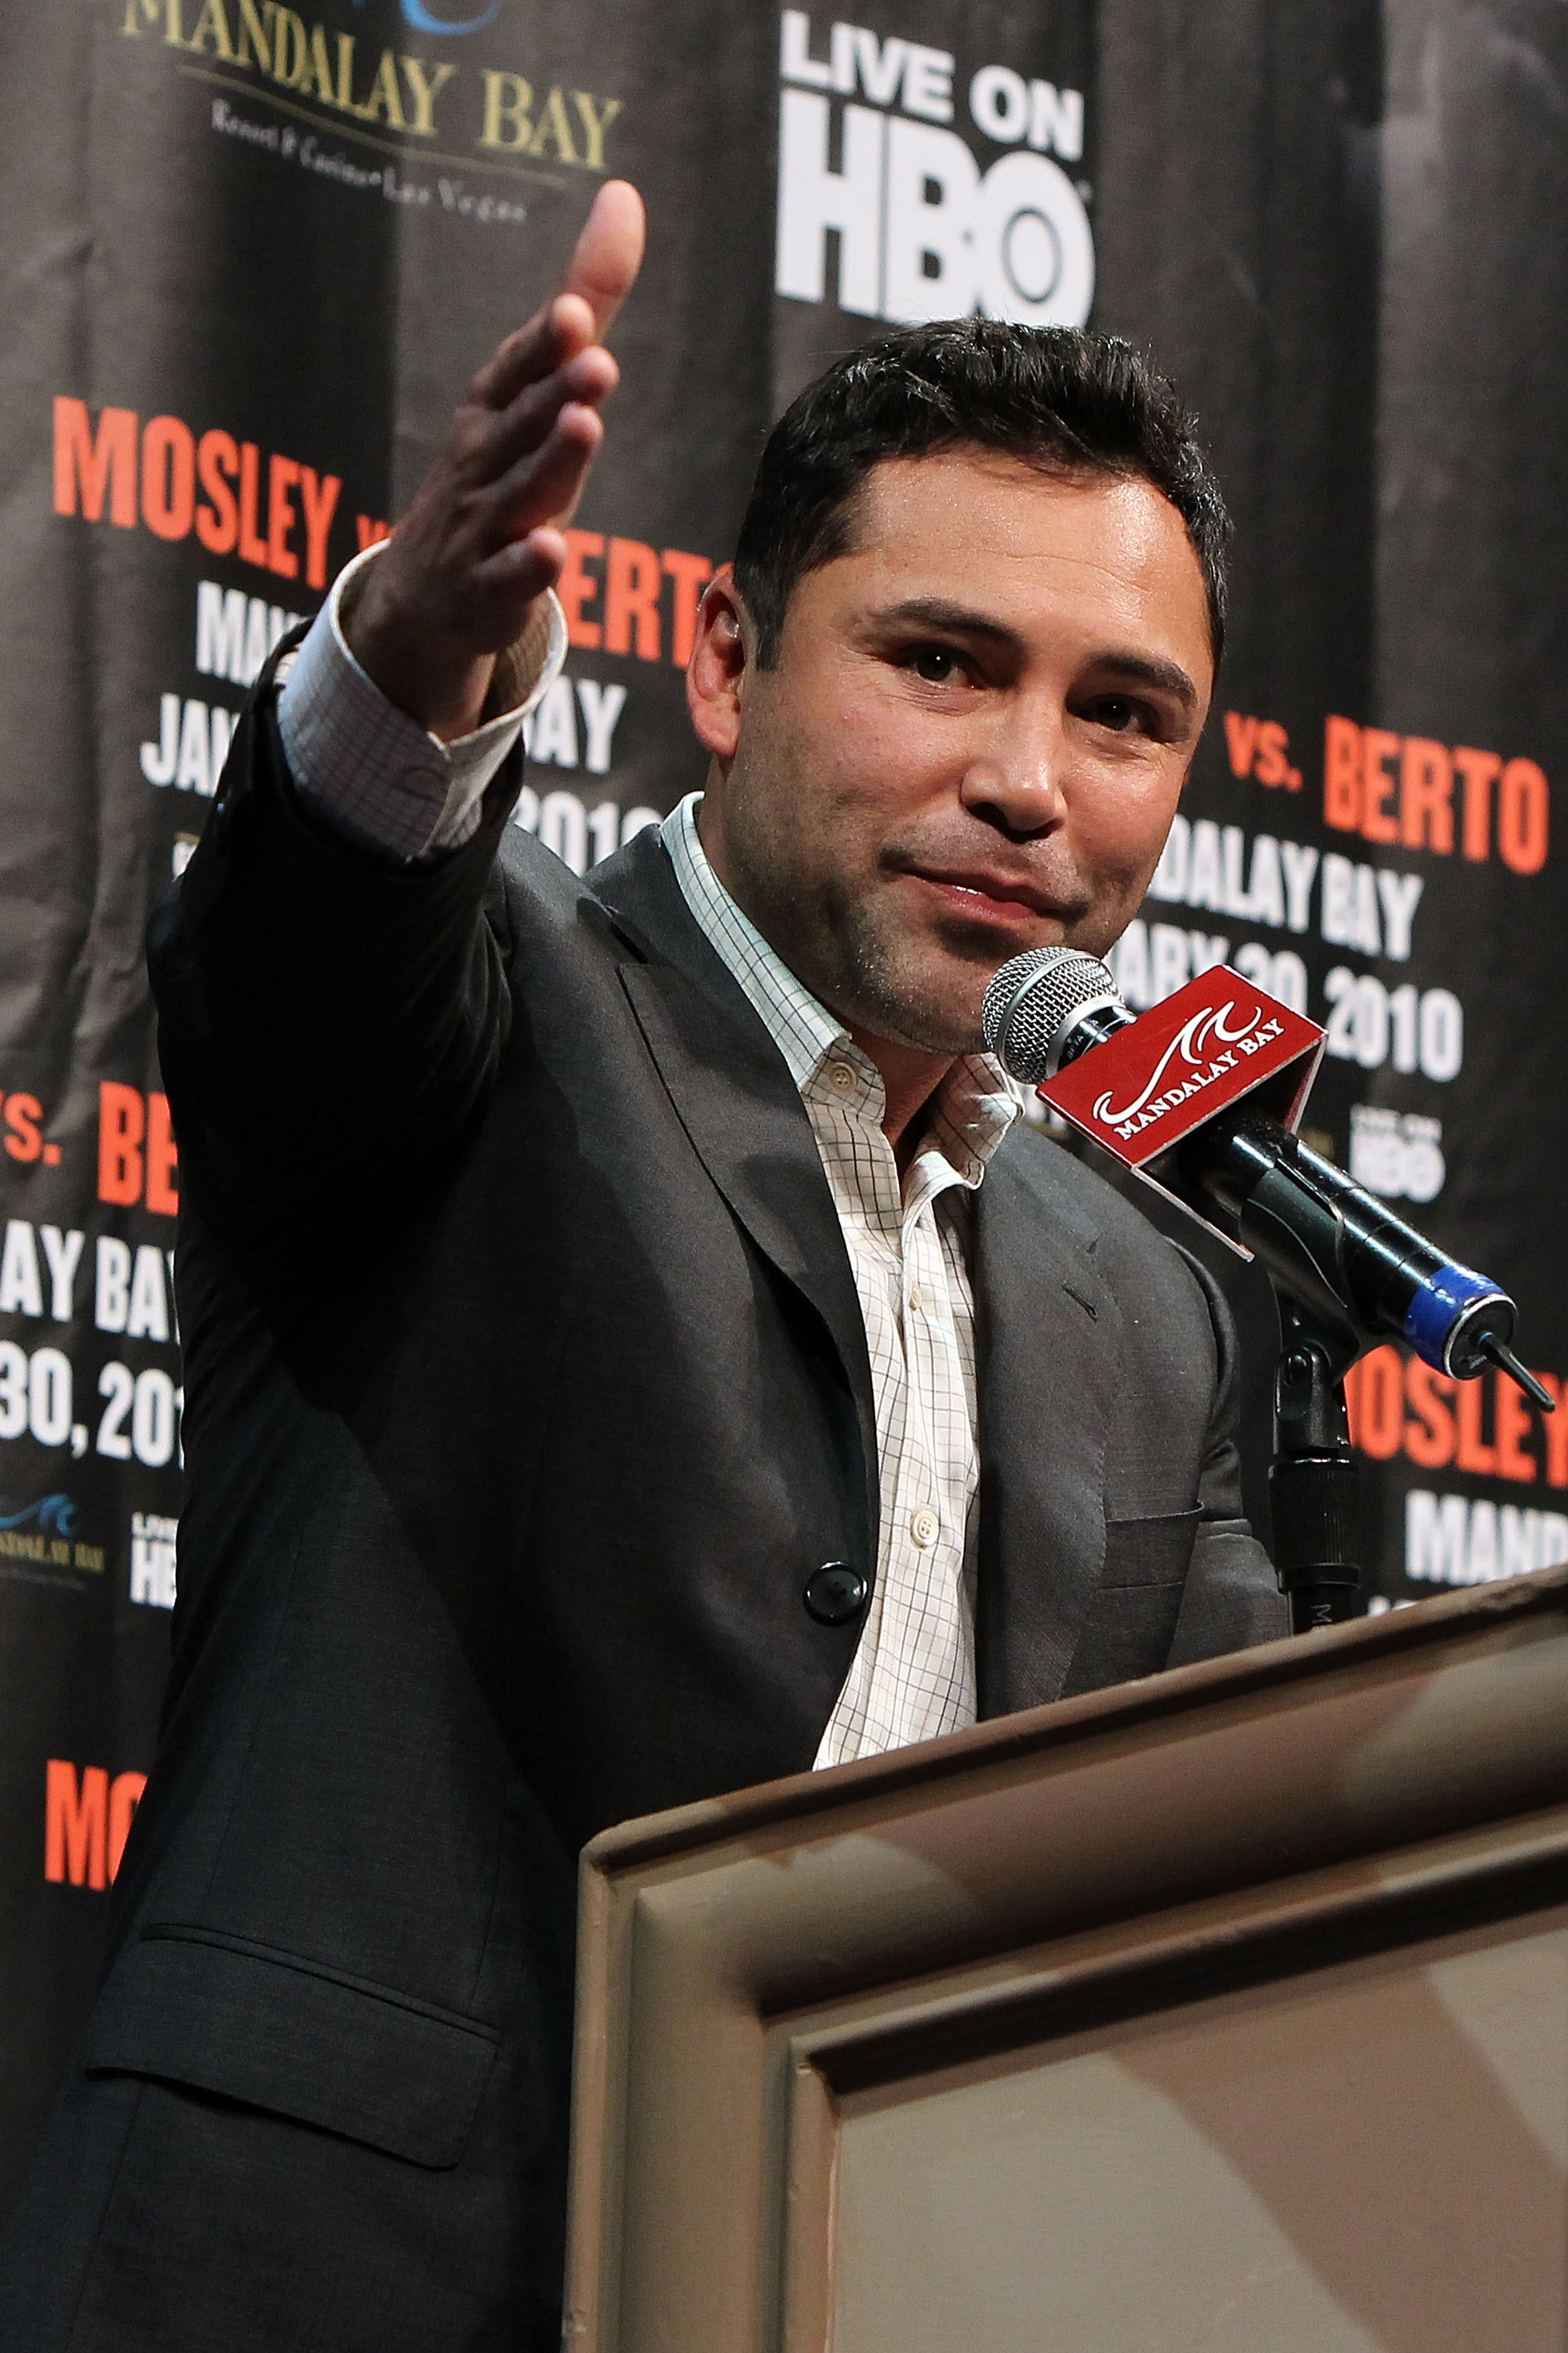 LAS VEGAS - NOVEMBER 14:  Promoter Oscar De La Hoya of Golden Boy Promotions speaks during a news conference at the Mandalay Bay Hotel & Casino on November 14, 2009 in Las Vegas, Nevada. Boxers Shane Mosley and Andre Berto announced today they will meet i